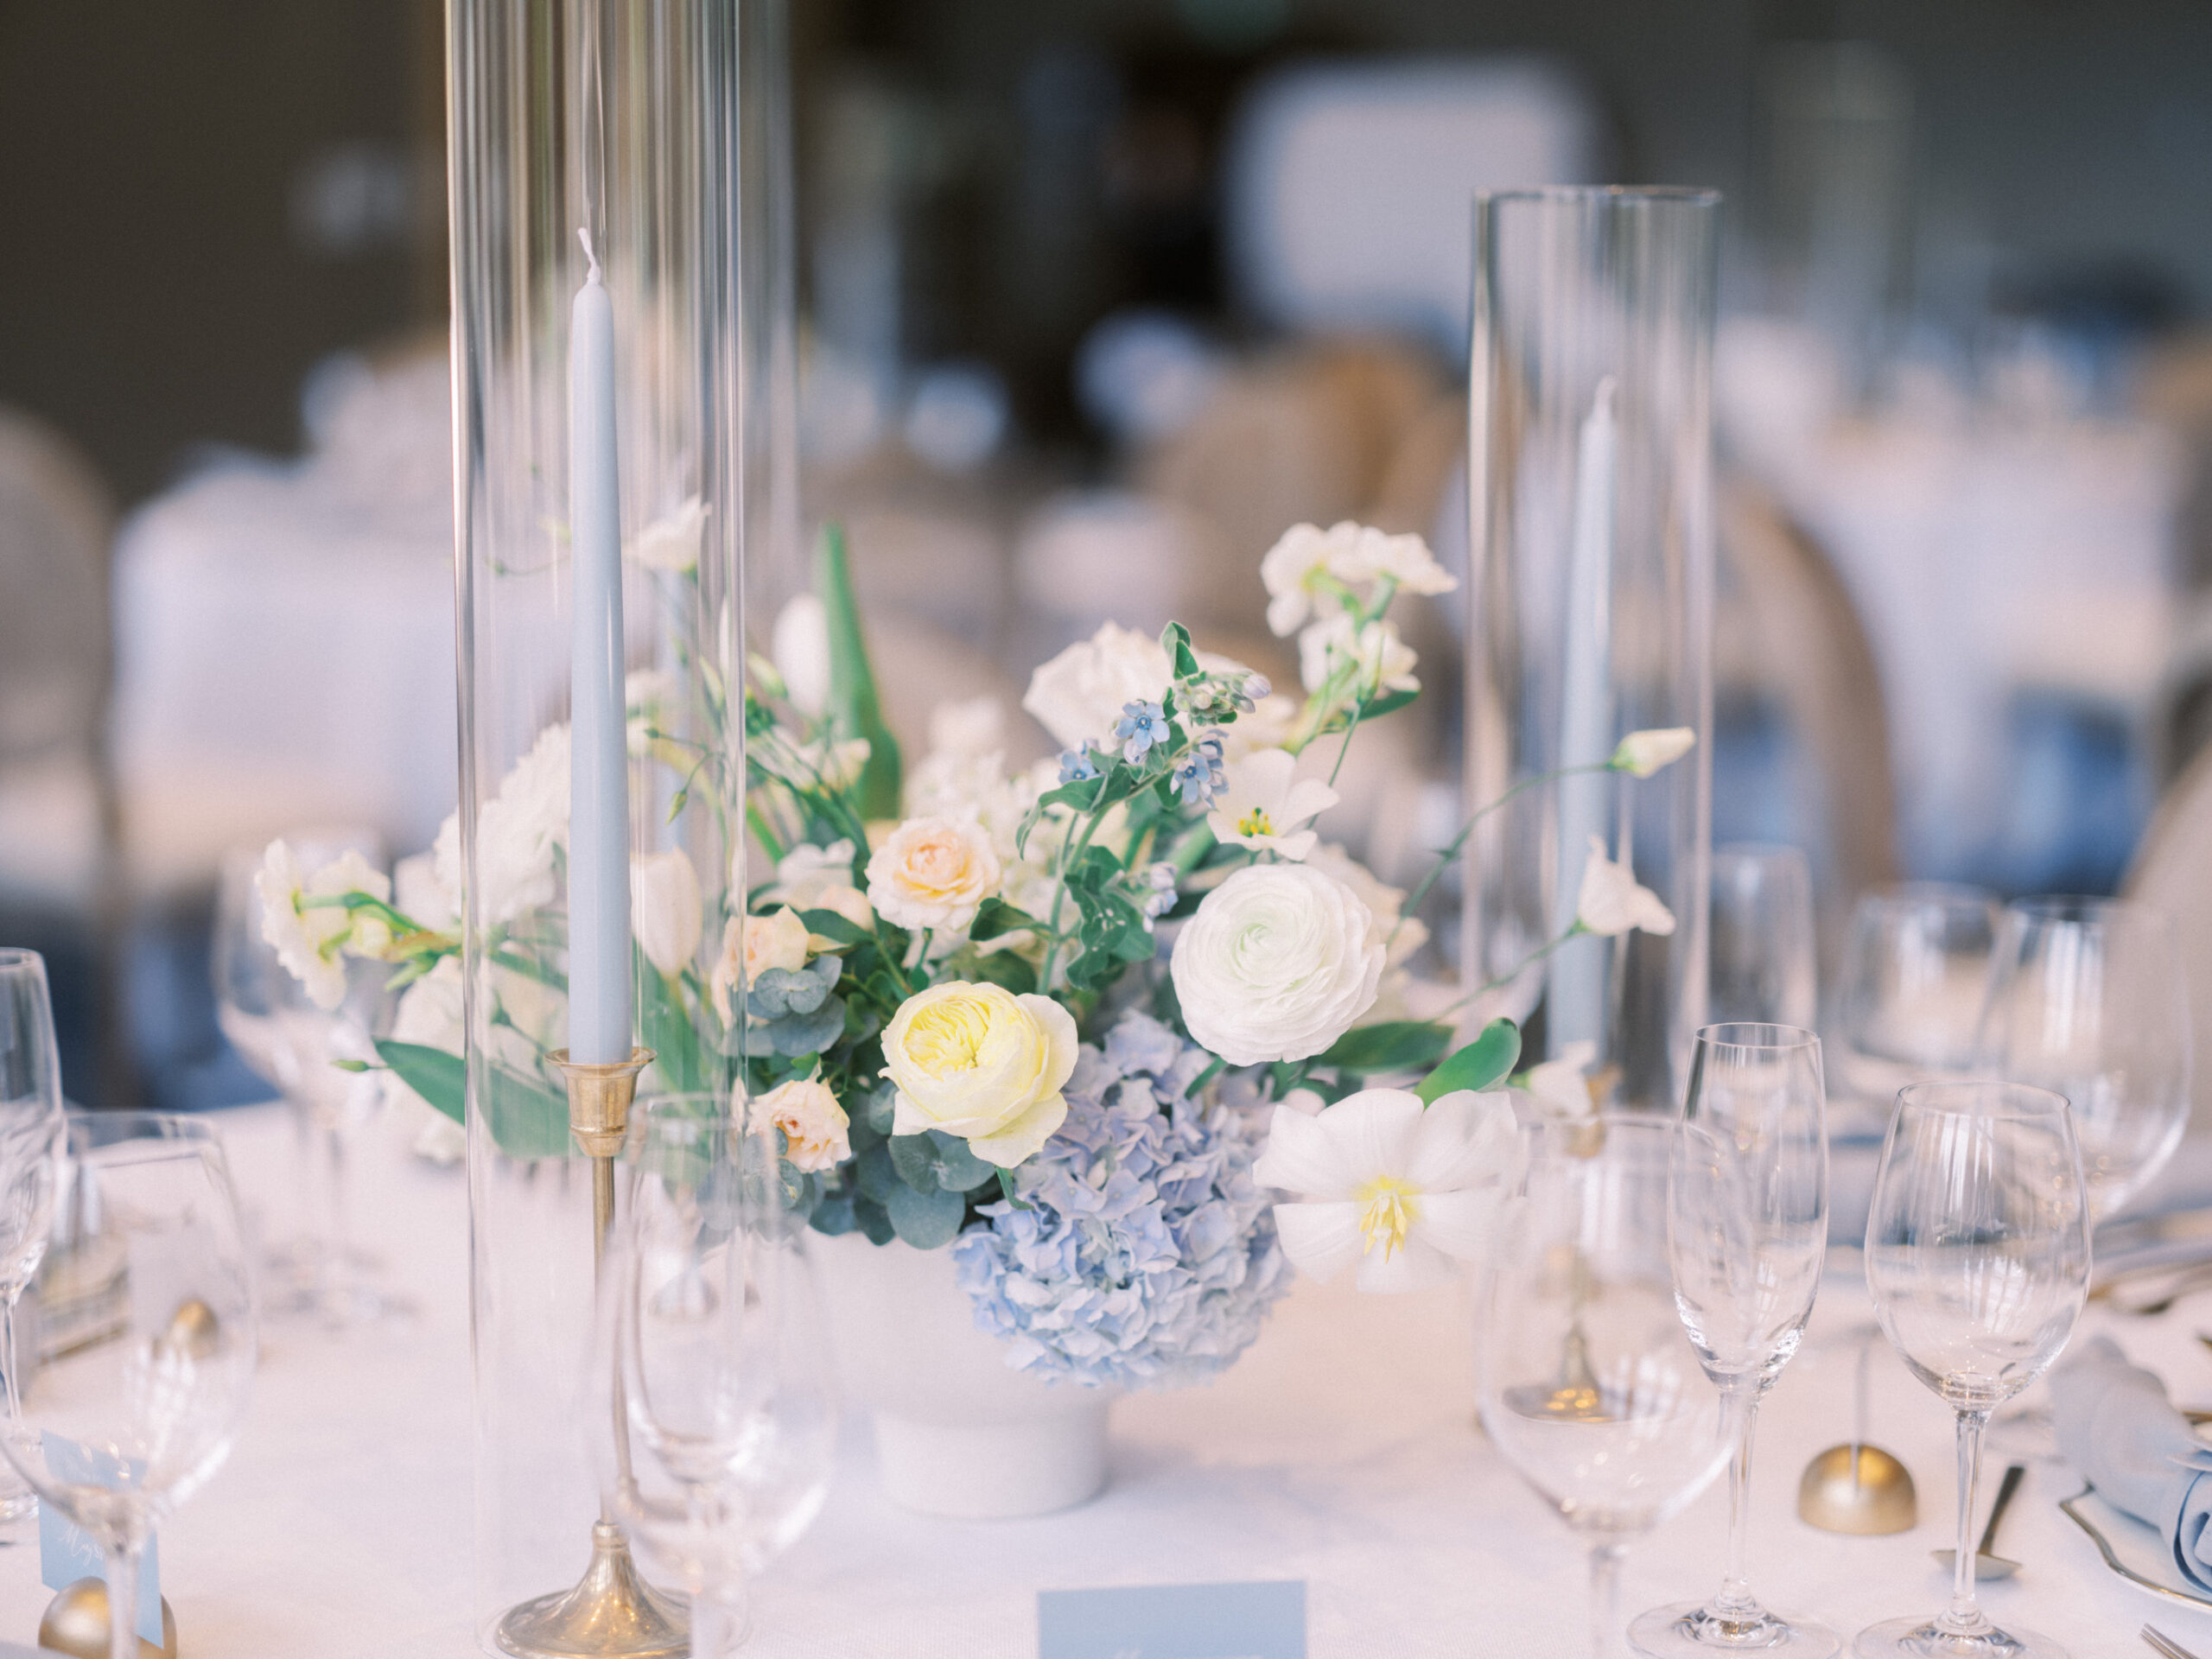 French Blue Parisian Wedding Inspiration, wedding ceremony hydrangeas roses, blue tapered candles wedding, gold cutlery, head table florals, bridal table flowers, hydrangea centrepieces, tall hydrangea centrepiece, blue ceremony arch, hydrangea ceremony arch, french wedding, light blue wedding, dusty blue florals, anemones, wedding floral inspo, blue wedding hydrangeas, nicole sarah wedding photography, gold trim wedding plates